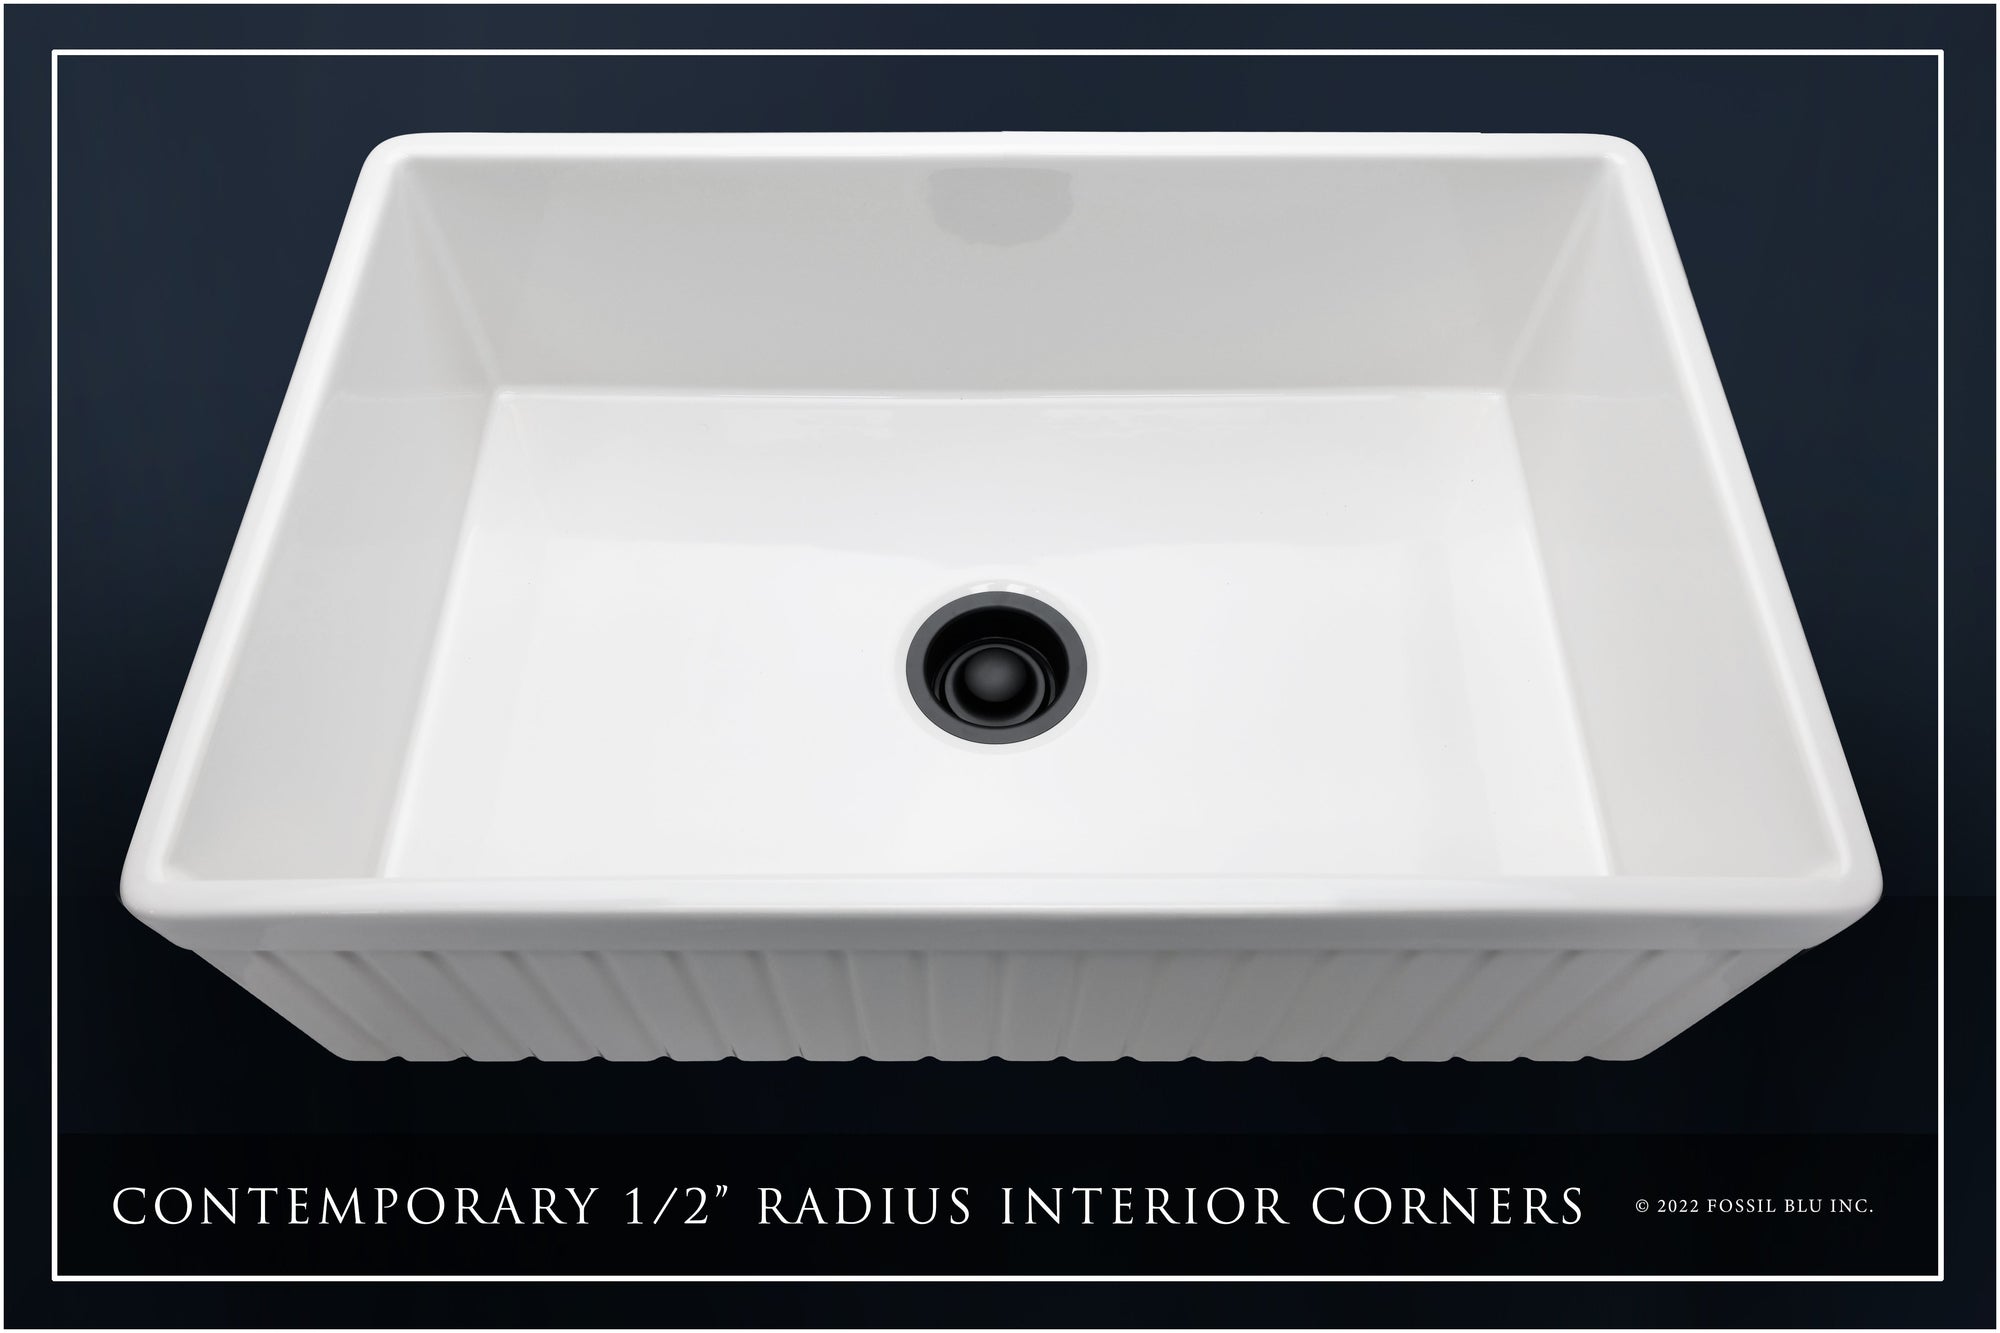 FSW1007MB LUXURY 33-INCH SOLID FIRECLAY FARMHOUSE SINK IN WHITE, MATTE BLACK ACCS, FLUTED FRONT